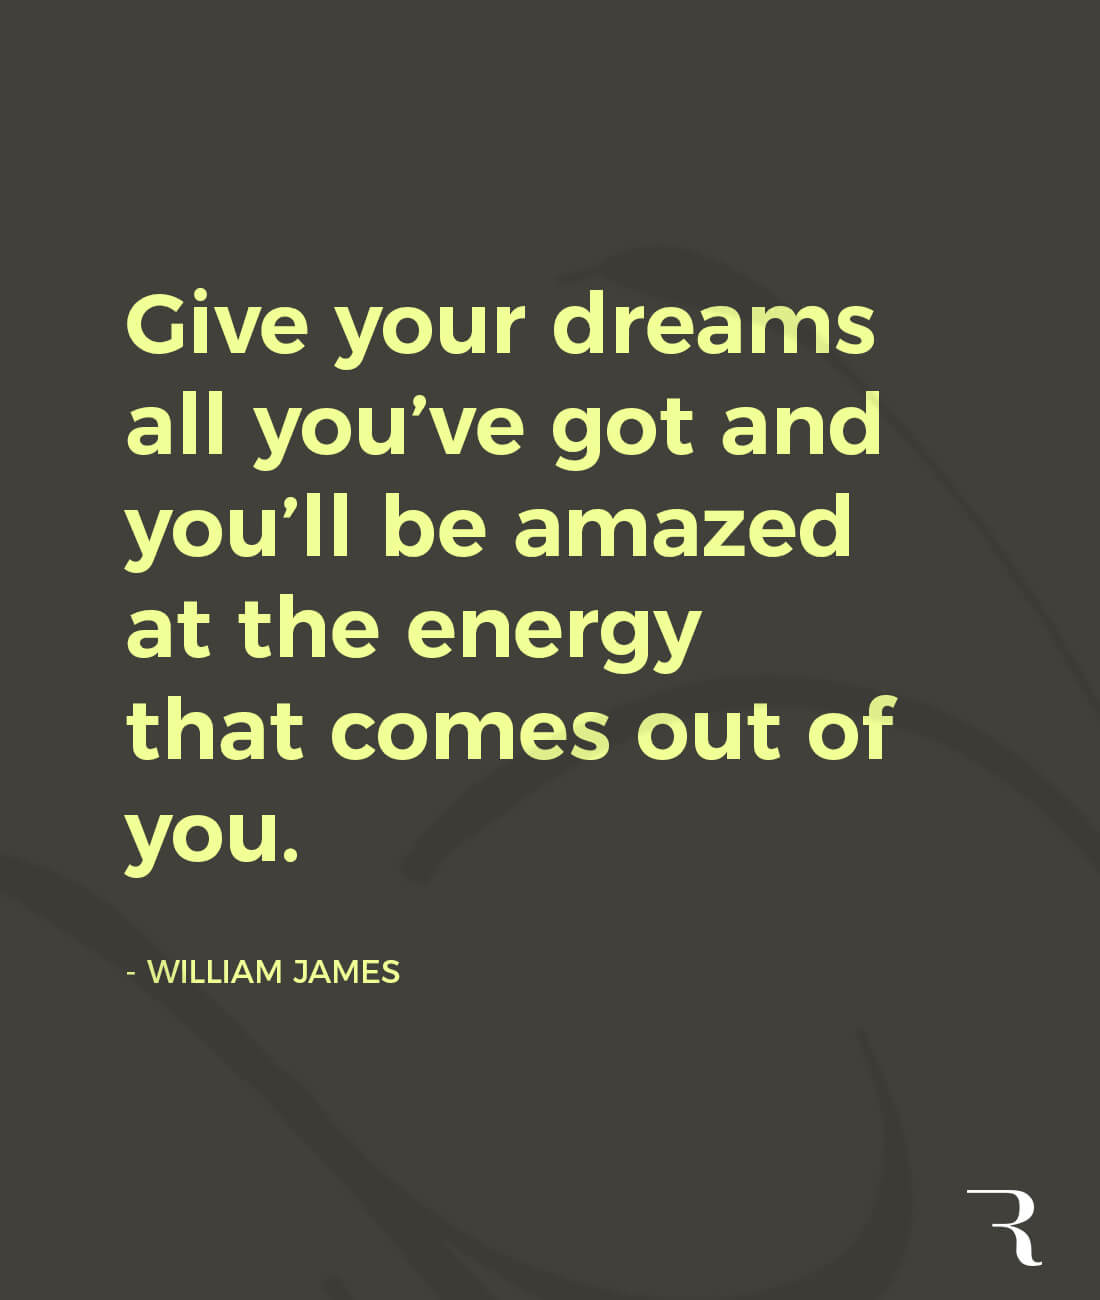 Motivational Quotes: "Give your dreams all you've got and you'll be amazed at the energy that comes out of you." 112 Motivational Quotes to Be a Better Entrepreneur